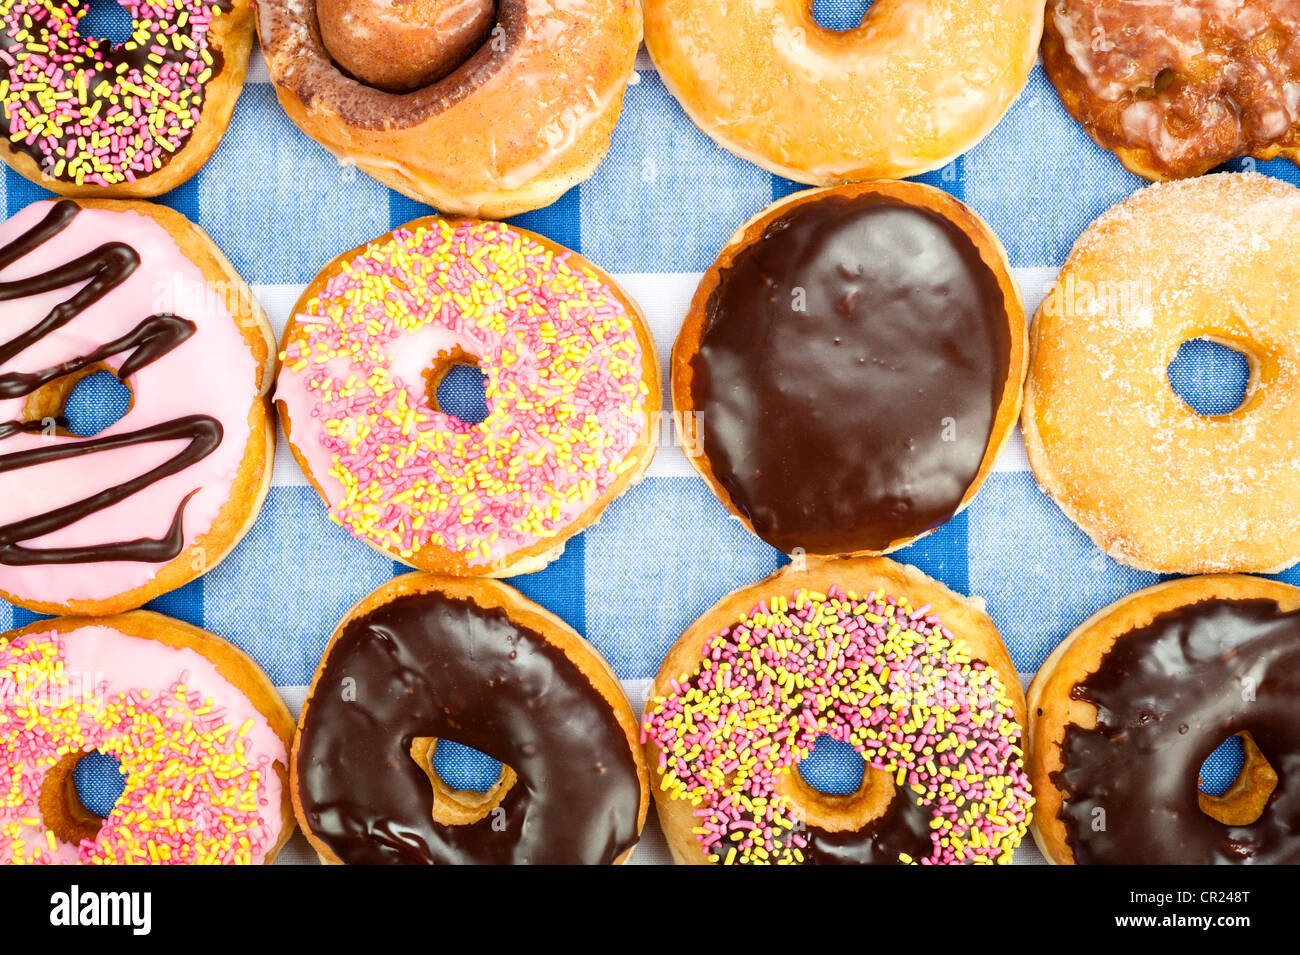 Assorted donuts with sweet toppings such as icing, sprinkles and sugary glaze on top of a blue and white checkered tablecloth Stock Photo